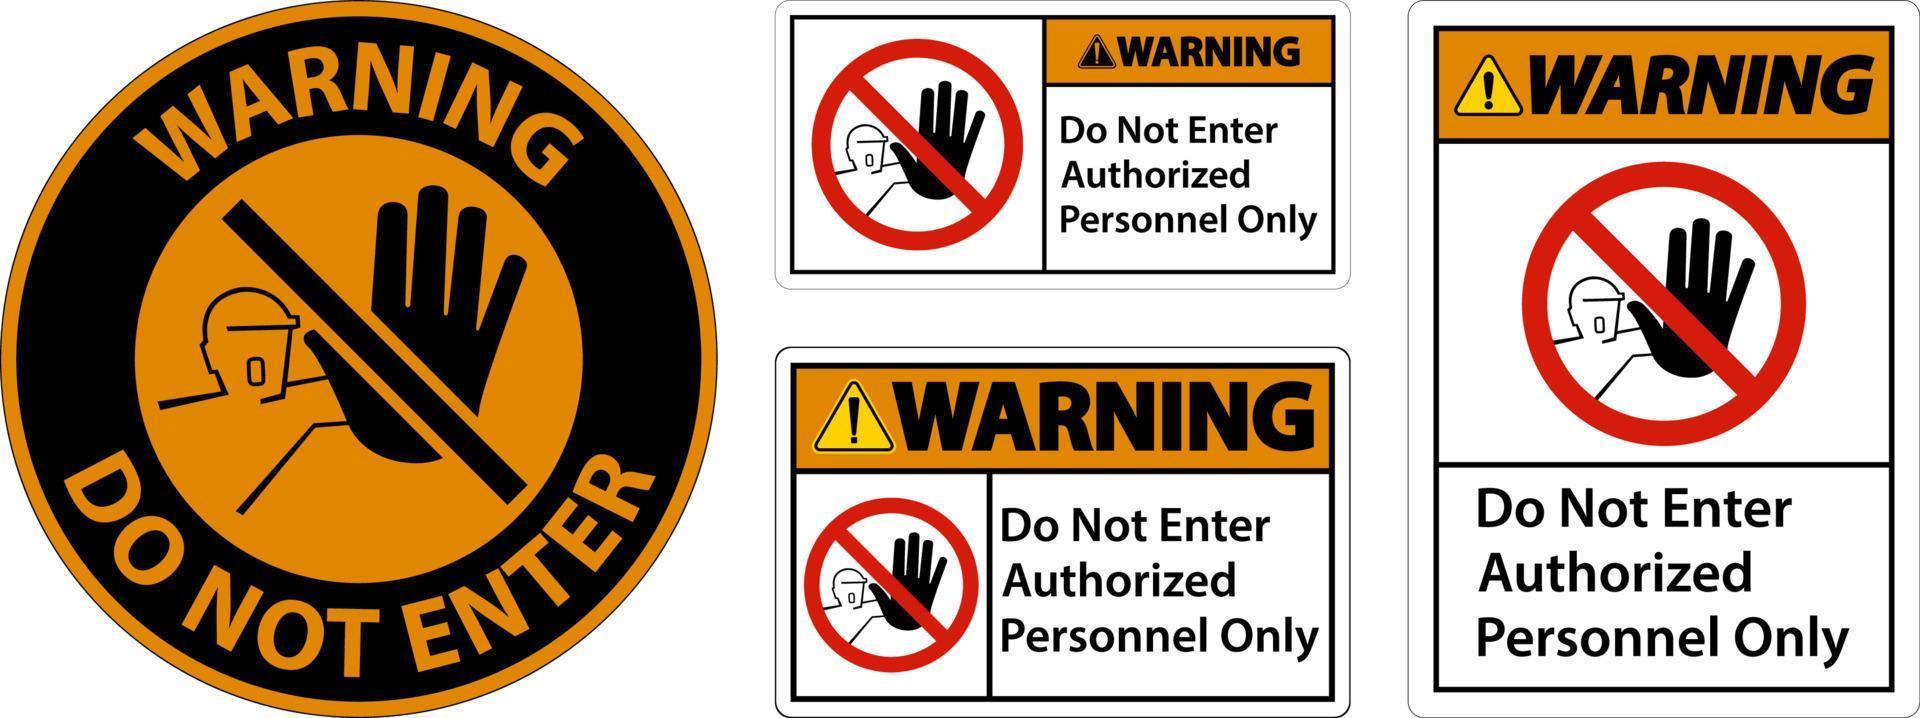 Warning Do Not Enter Authorized Personnel Only Sign vector